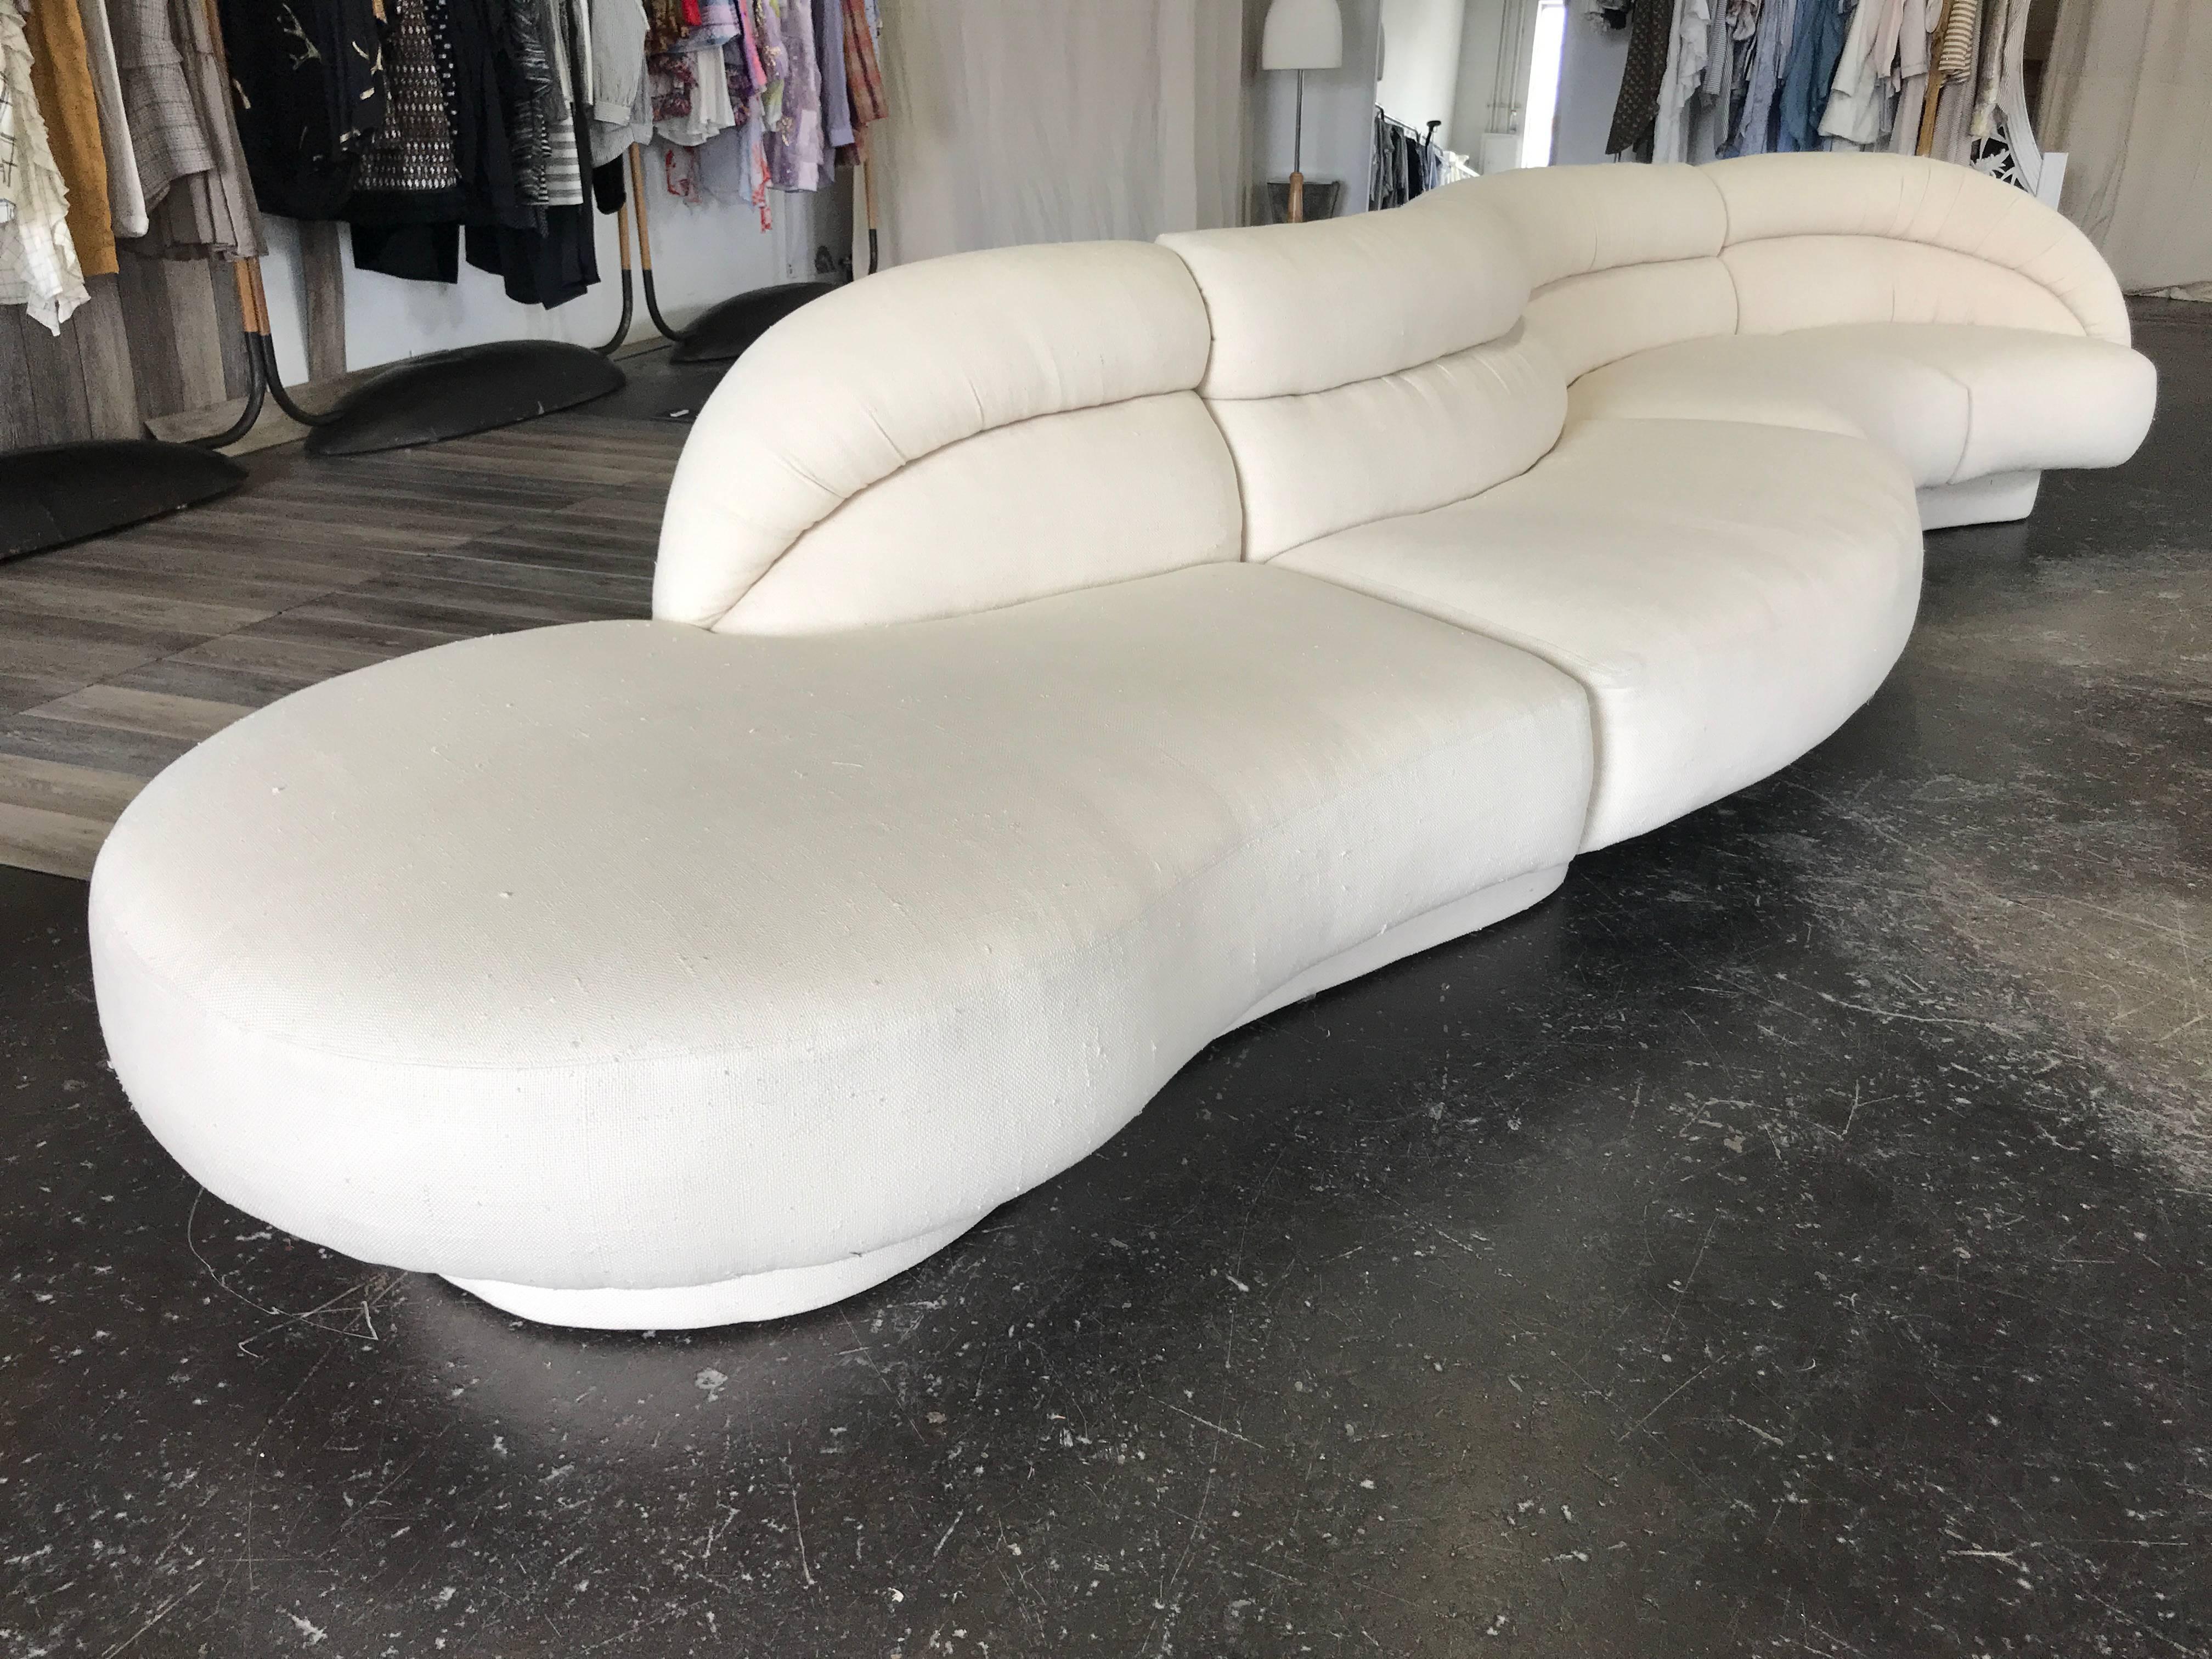 Monumental serpentine sofa by Directional. Sofa is in good vintage condition but does need new upholstery.

Dimensions:
175